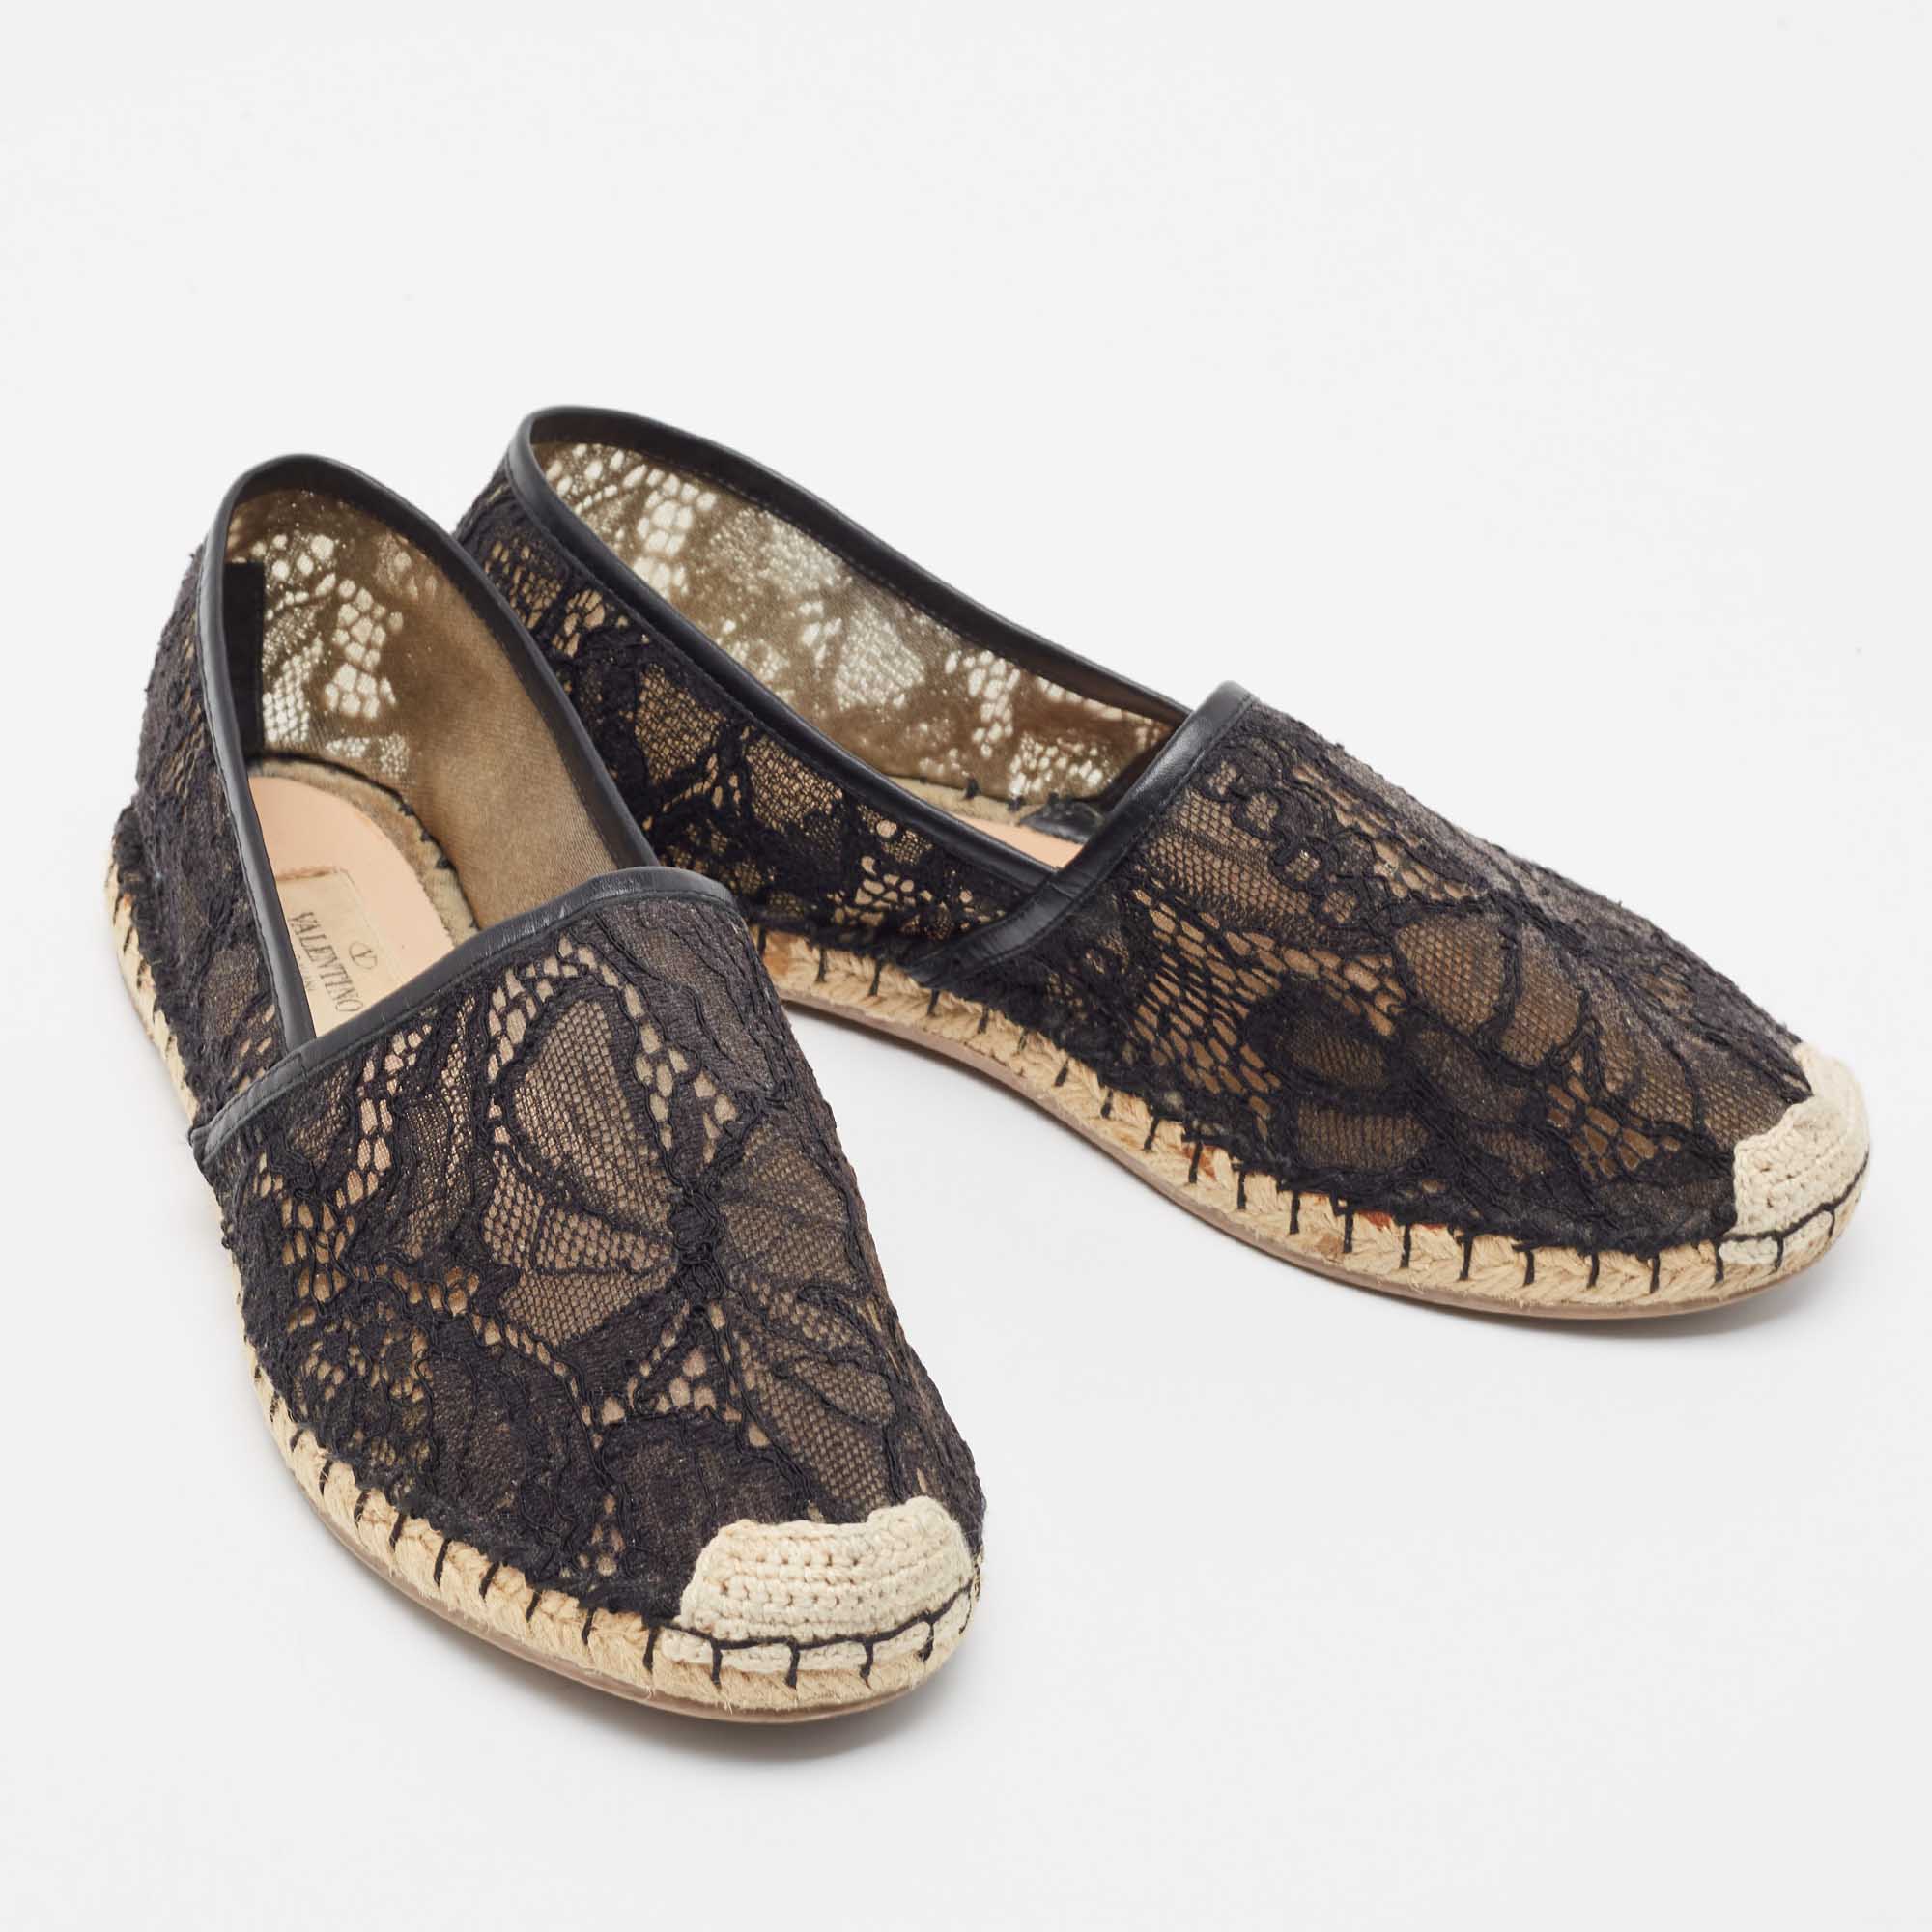 Valentino Black Lace And Leather Butterfly Espadrille Flats Size 38